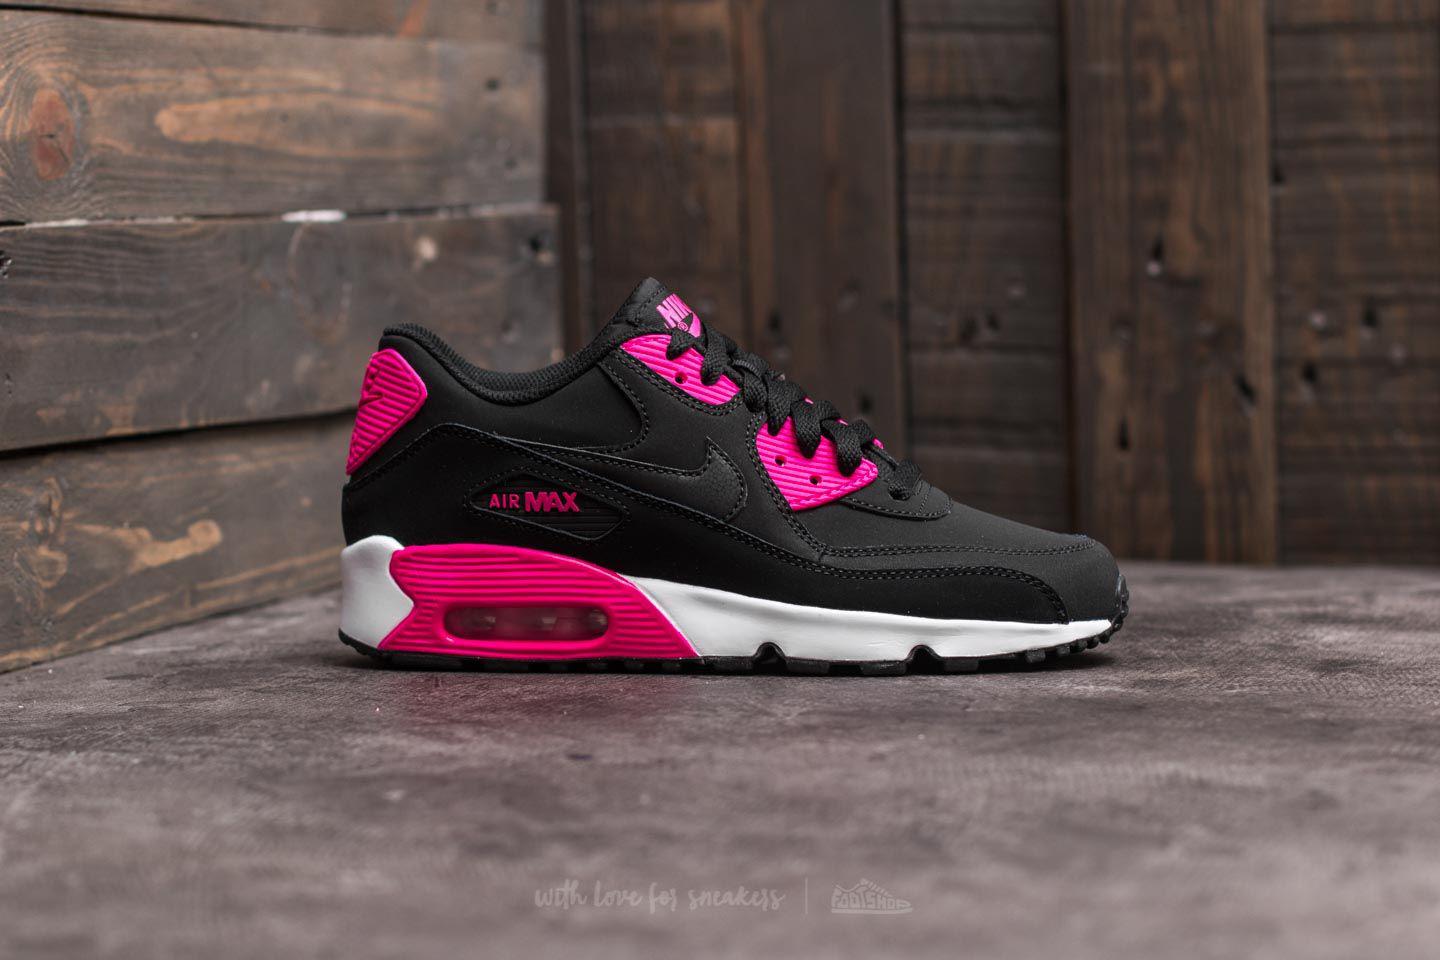 Nike Air Max 90 Leather (gs) Black/ Pink Prime-white | Lyst